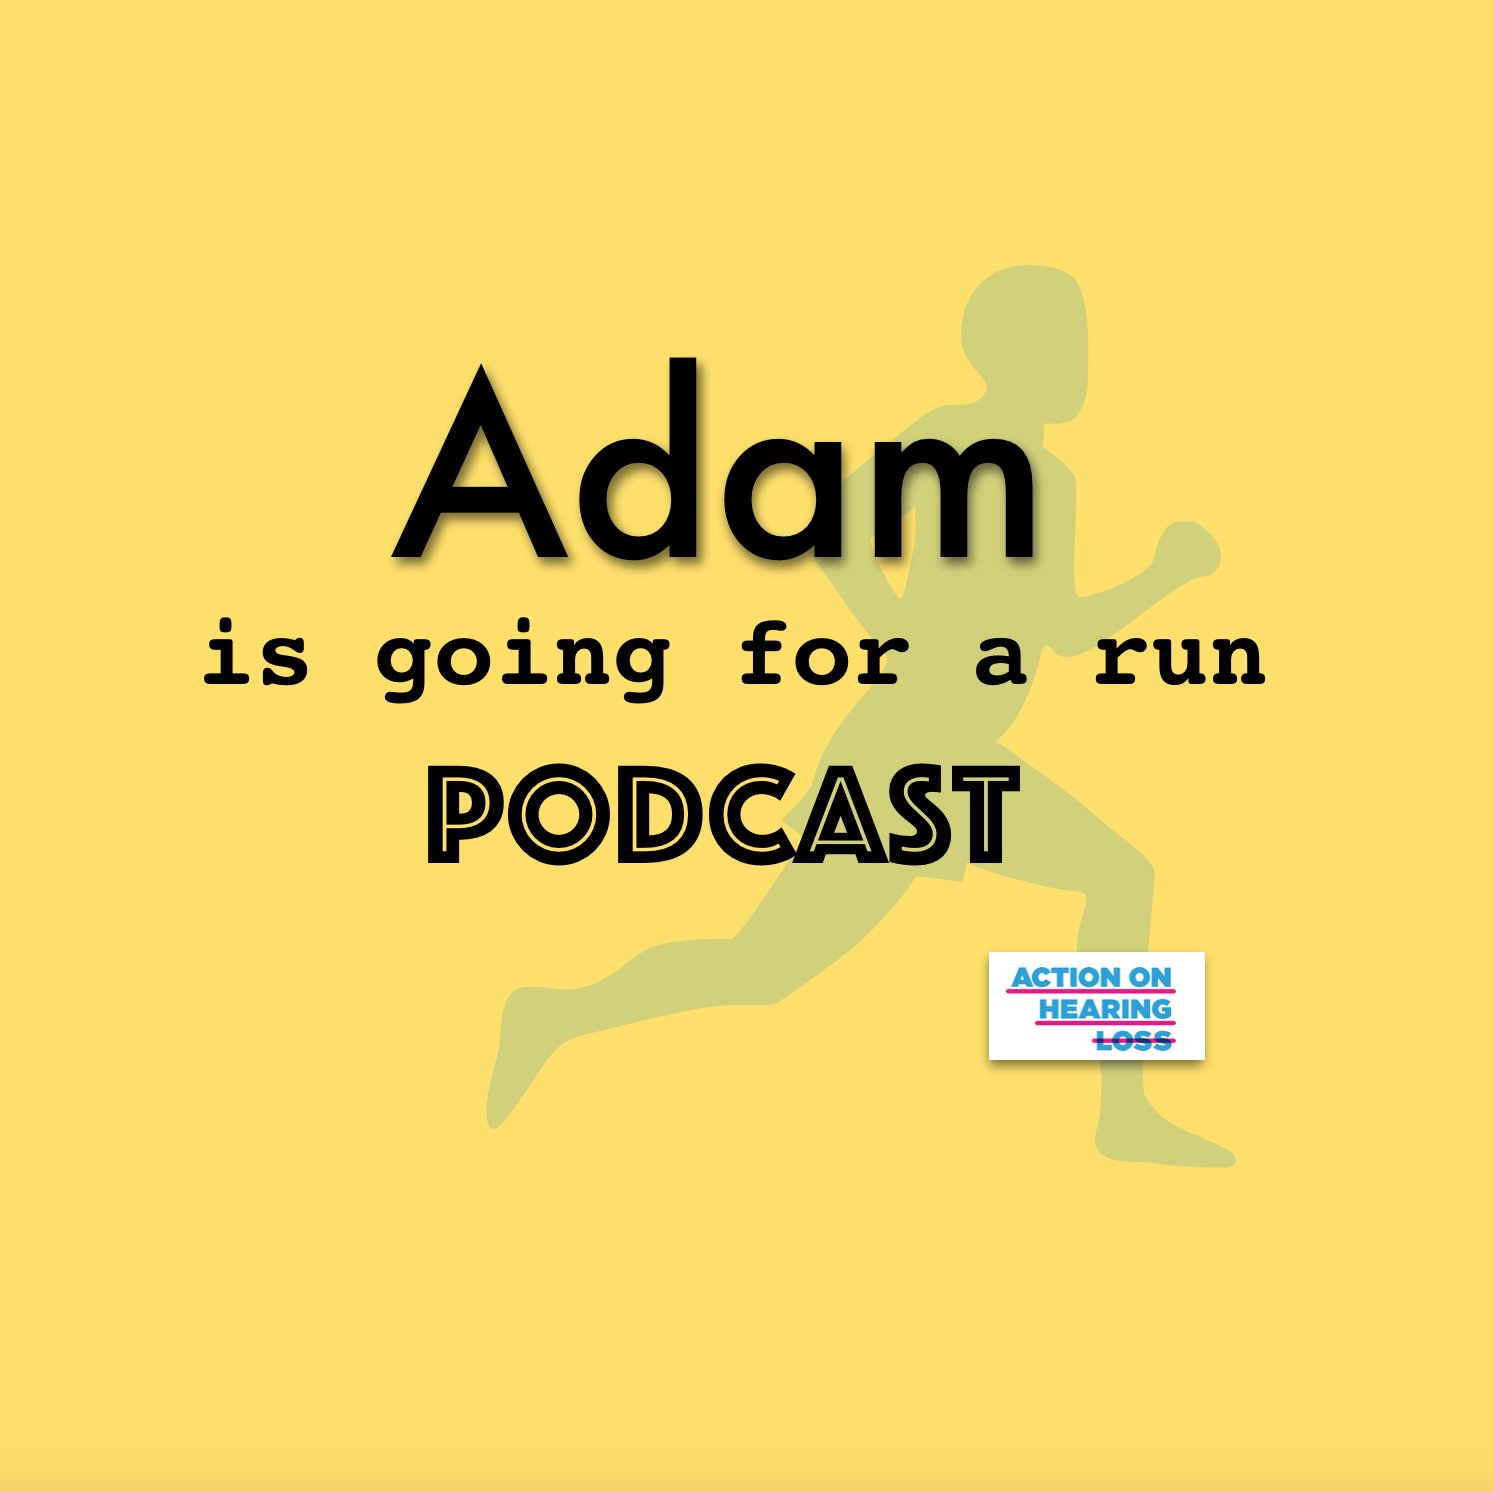 In 2017 I'm going to be running my first marathon in London for Action on Hearing Loss. This podcast is running talk, a training diary and general chit chat!